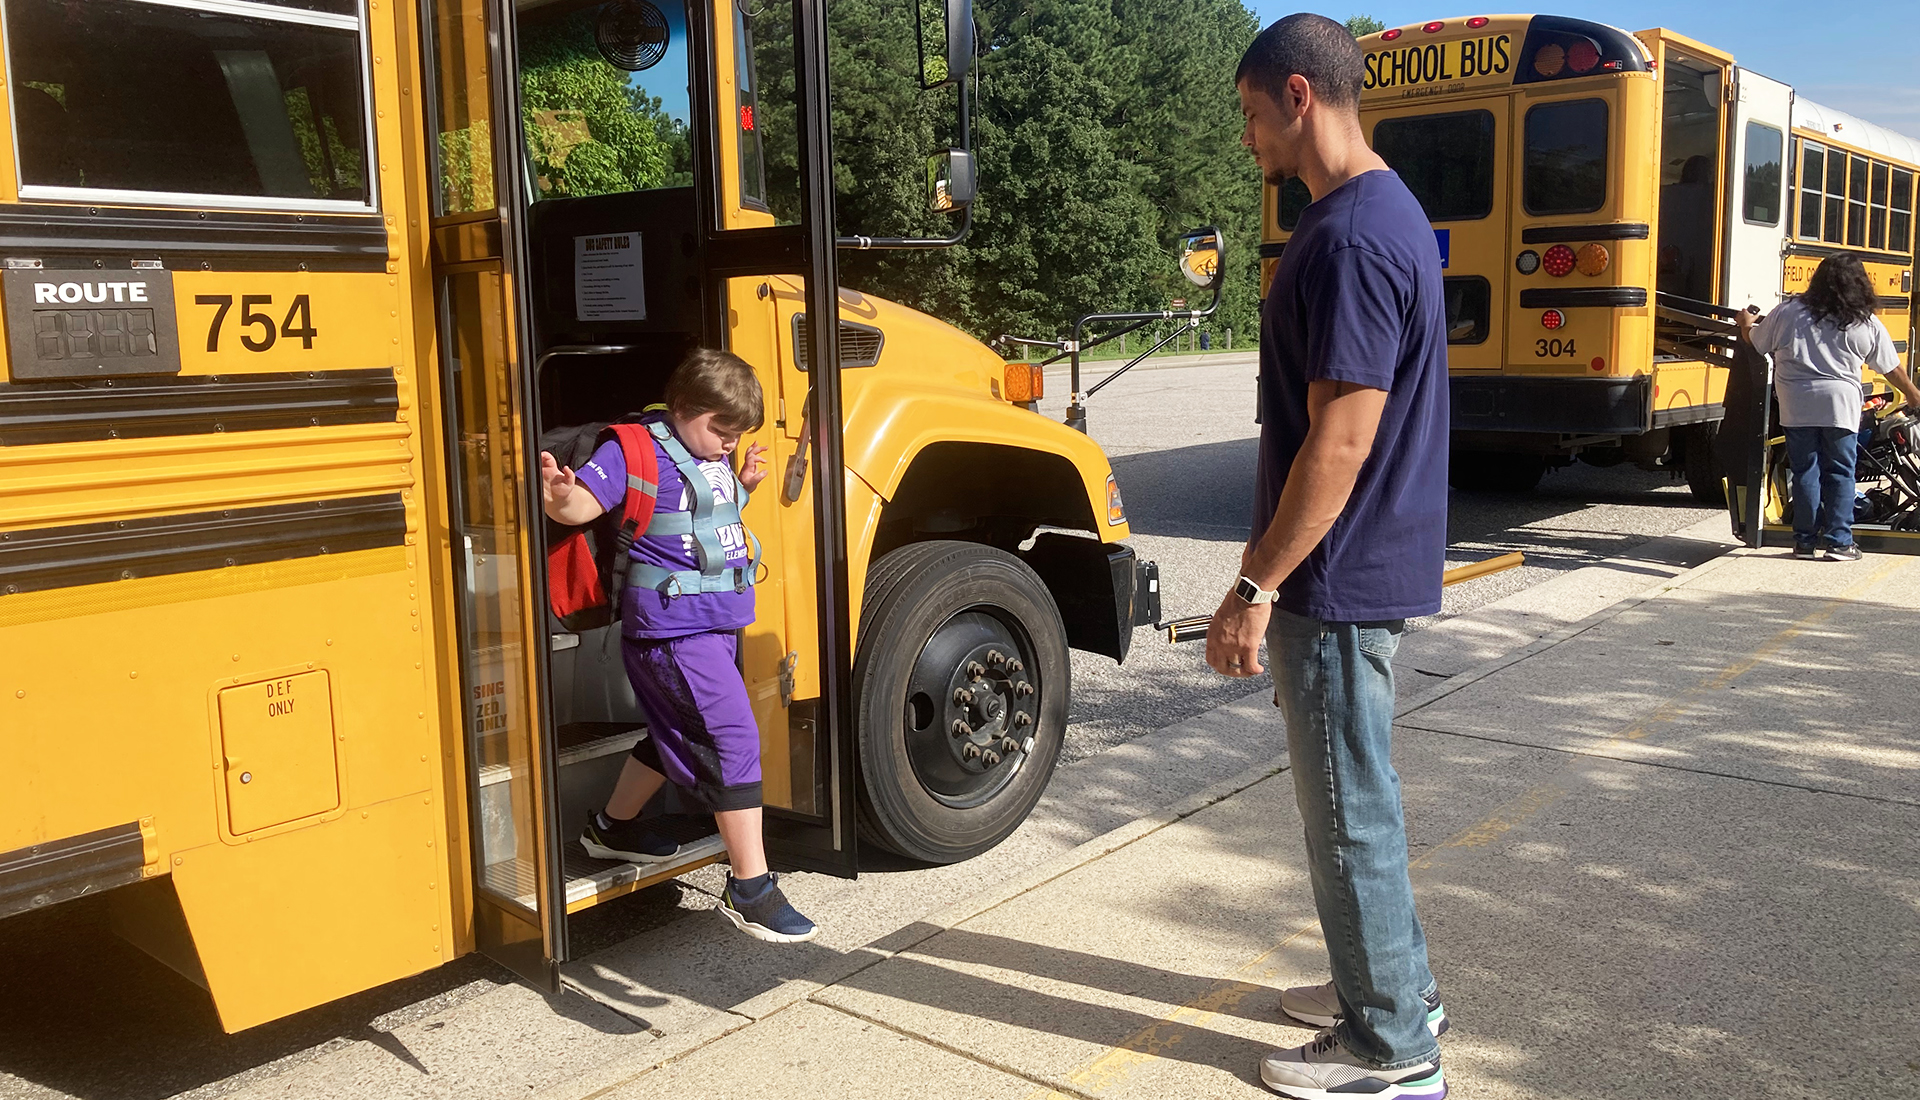 Student getting off a bus while teacher awaits.